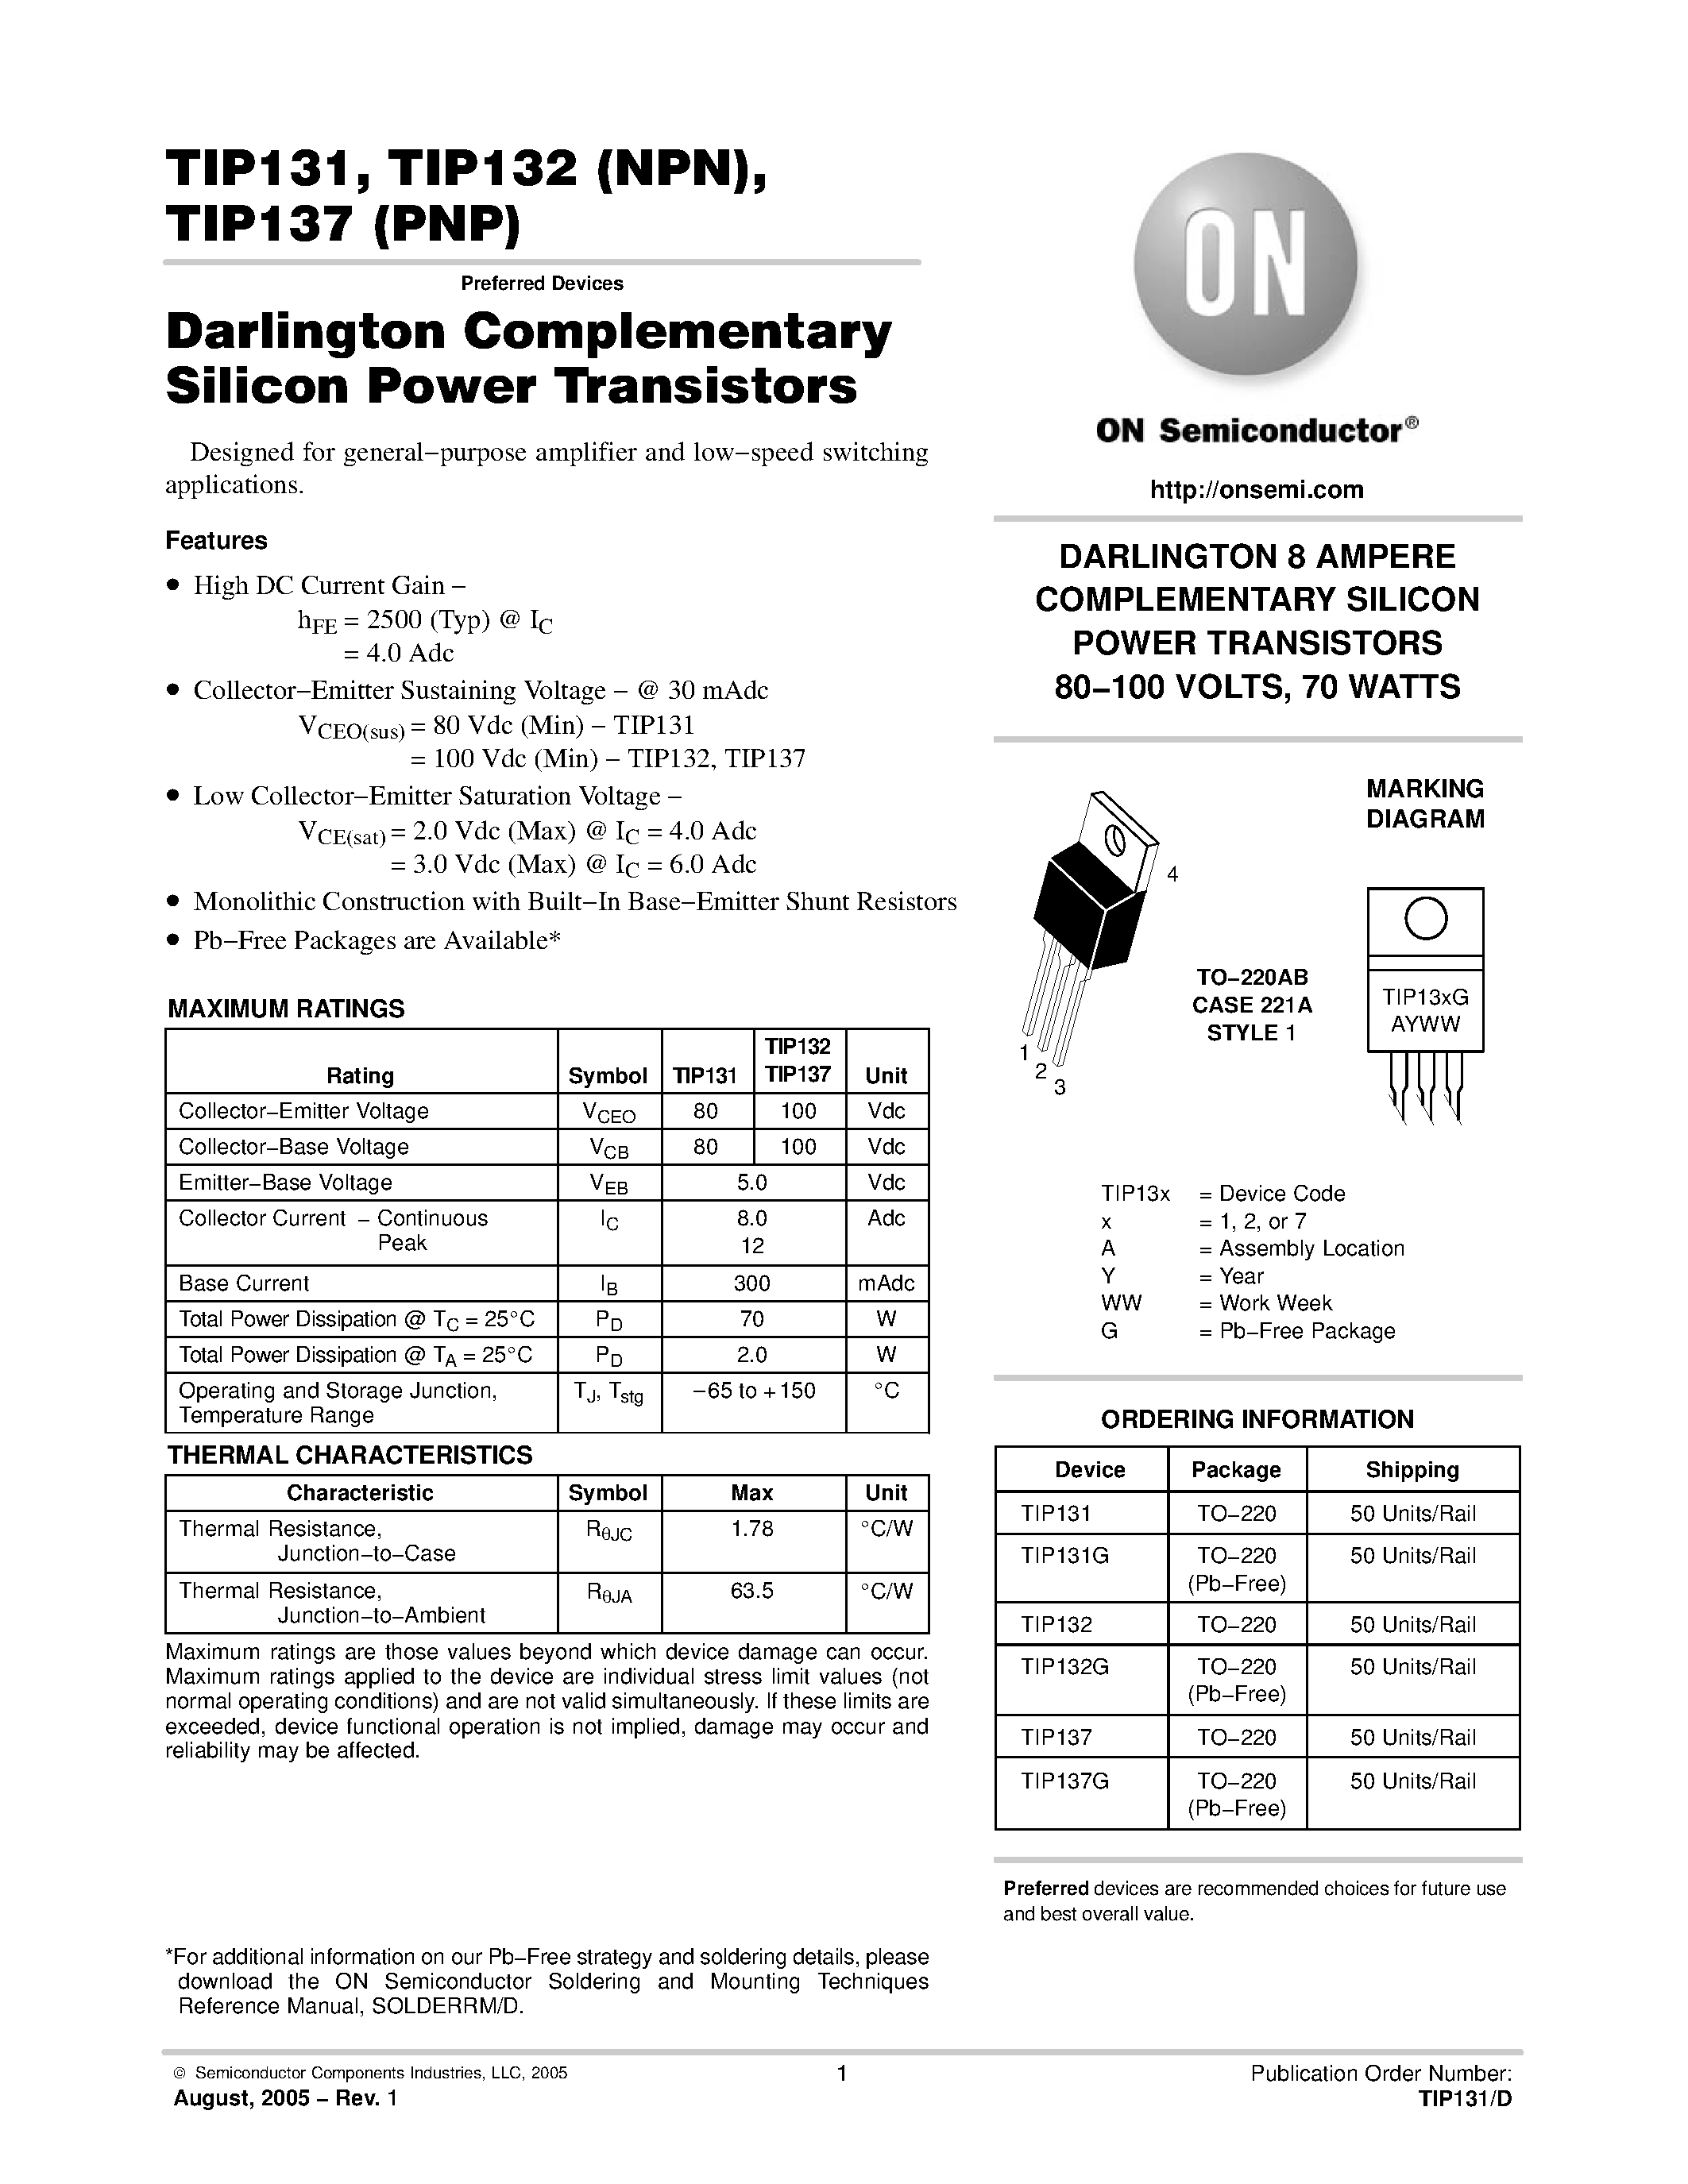 Даташит TIP131 - (TIP131 - TIP137) Darlington Complementary Silicon Power Transistors страница 1